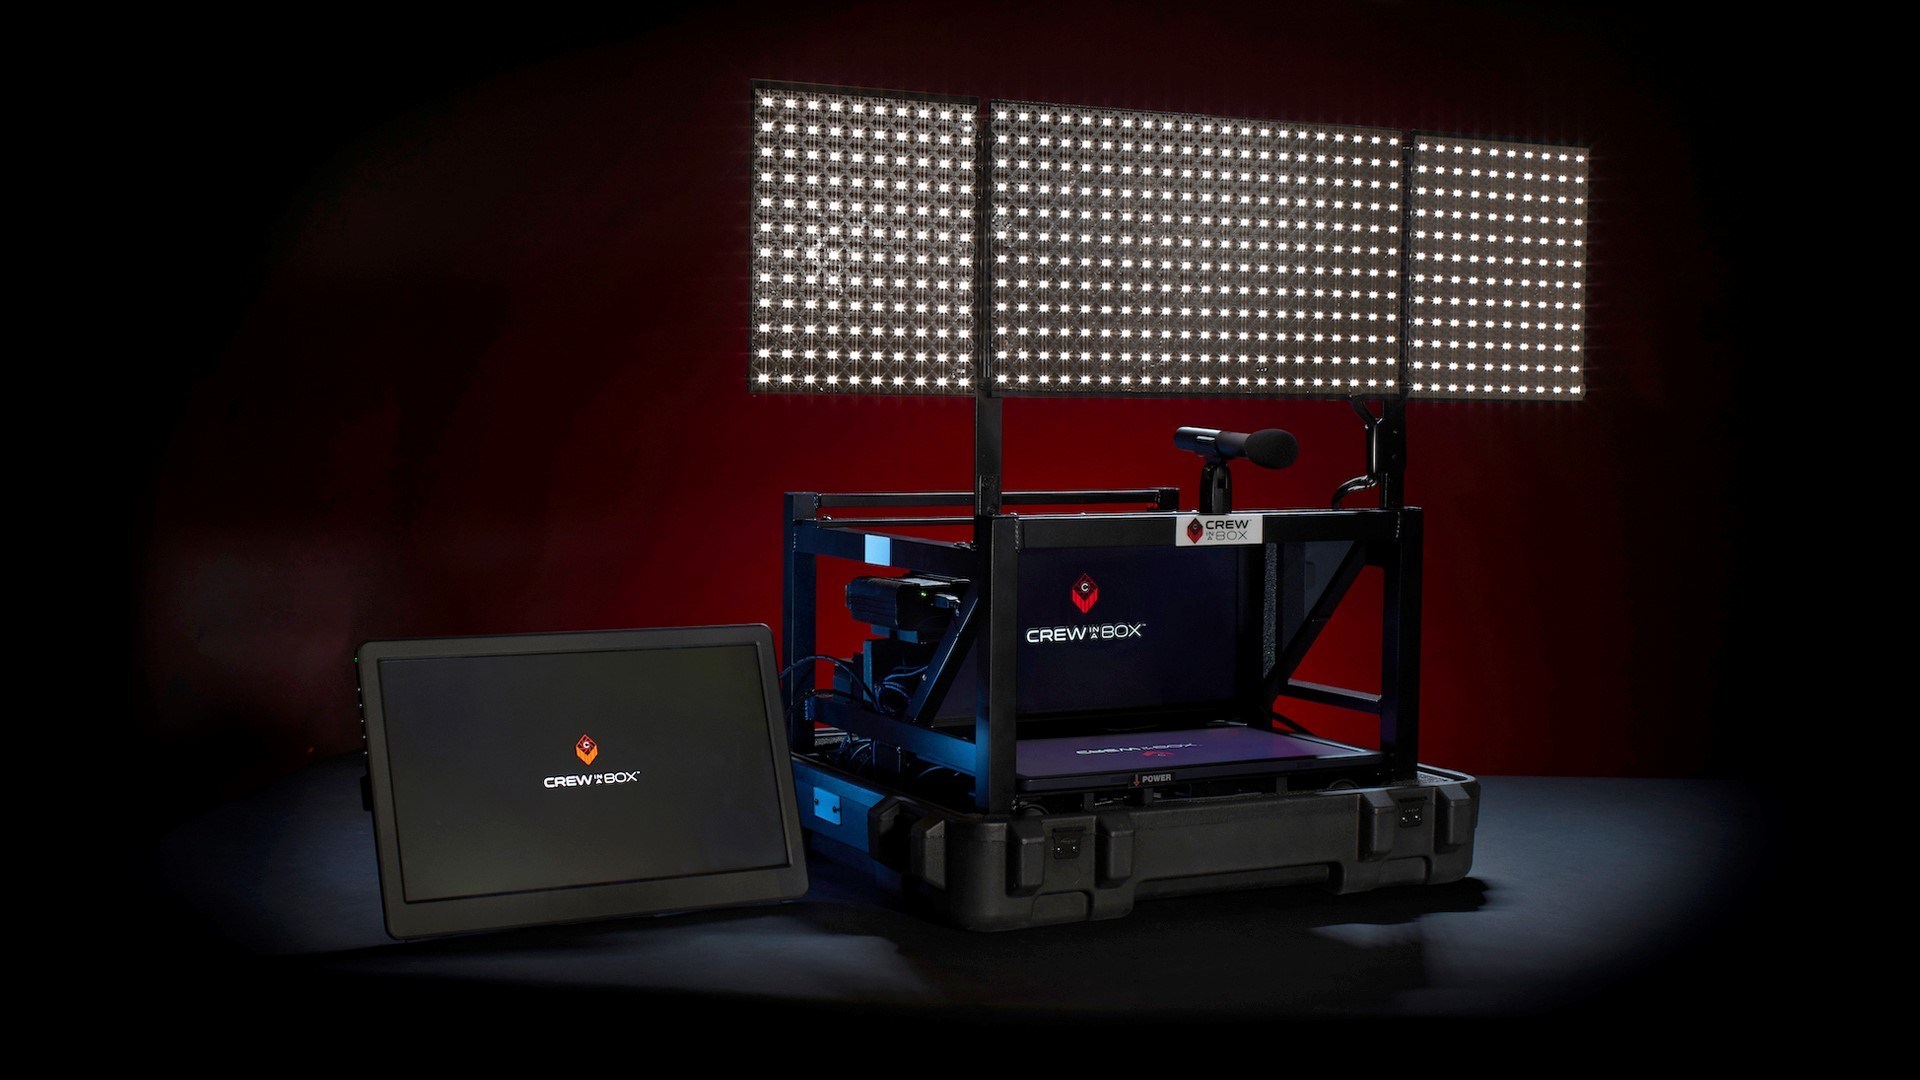 Remote video production solution Crew in a Box made its CES debut.